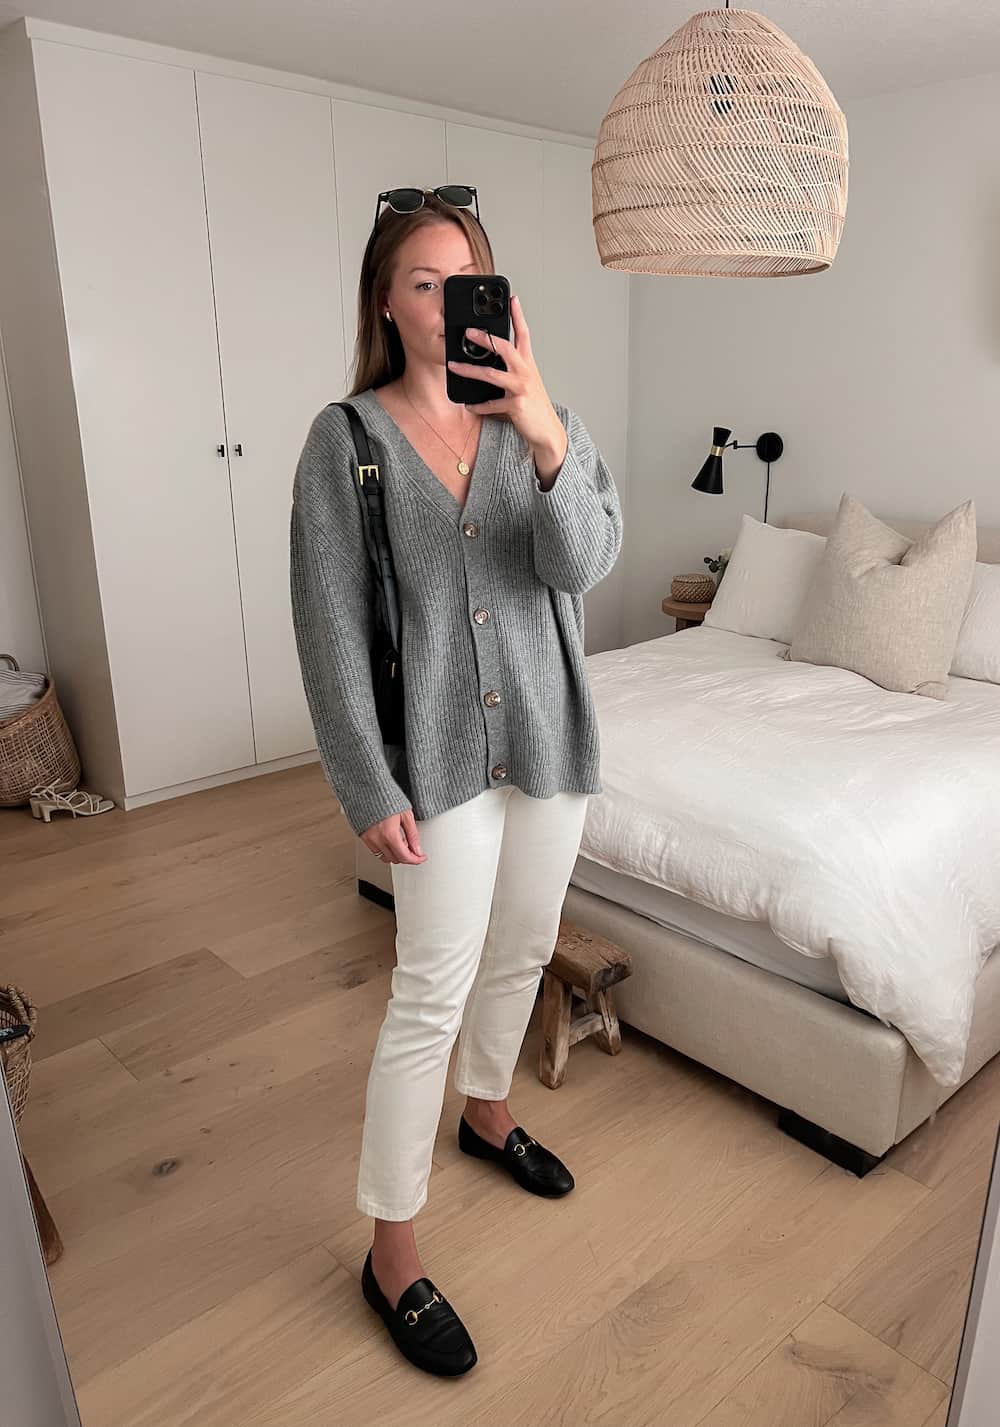 Christal wearing an oversized grey Quince cardigan with white jeans and black loafers as part of a fall capsule wardrobe 